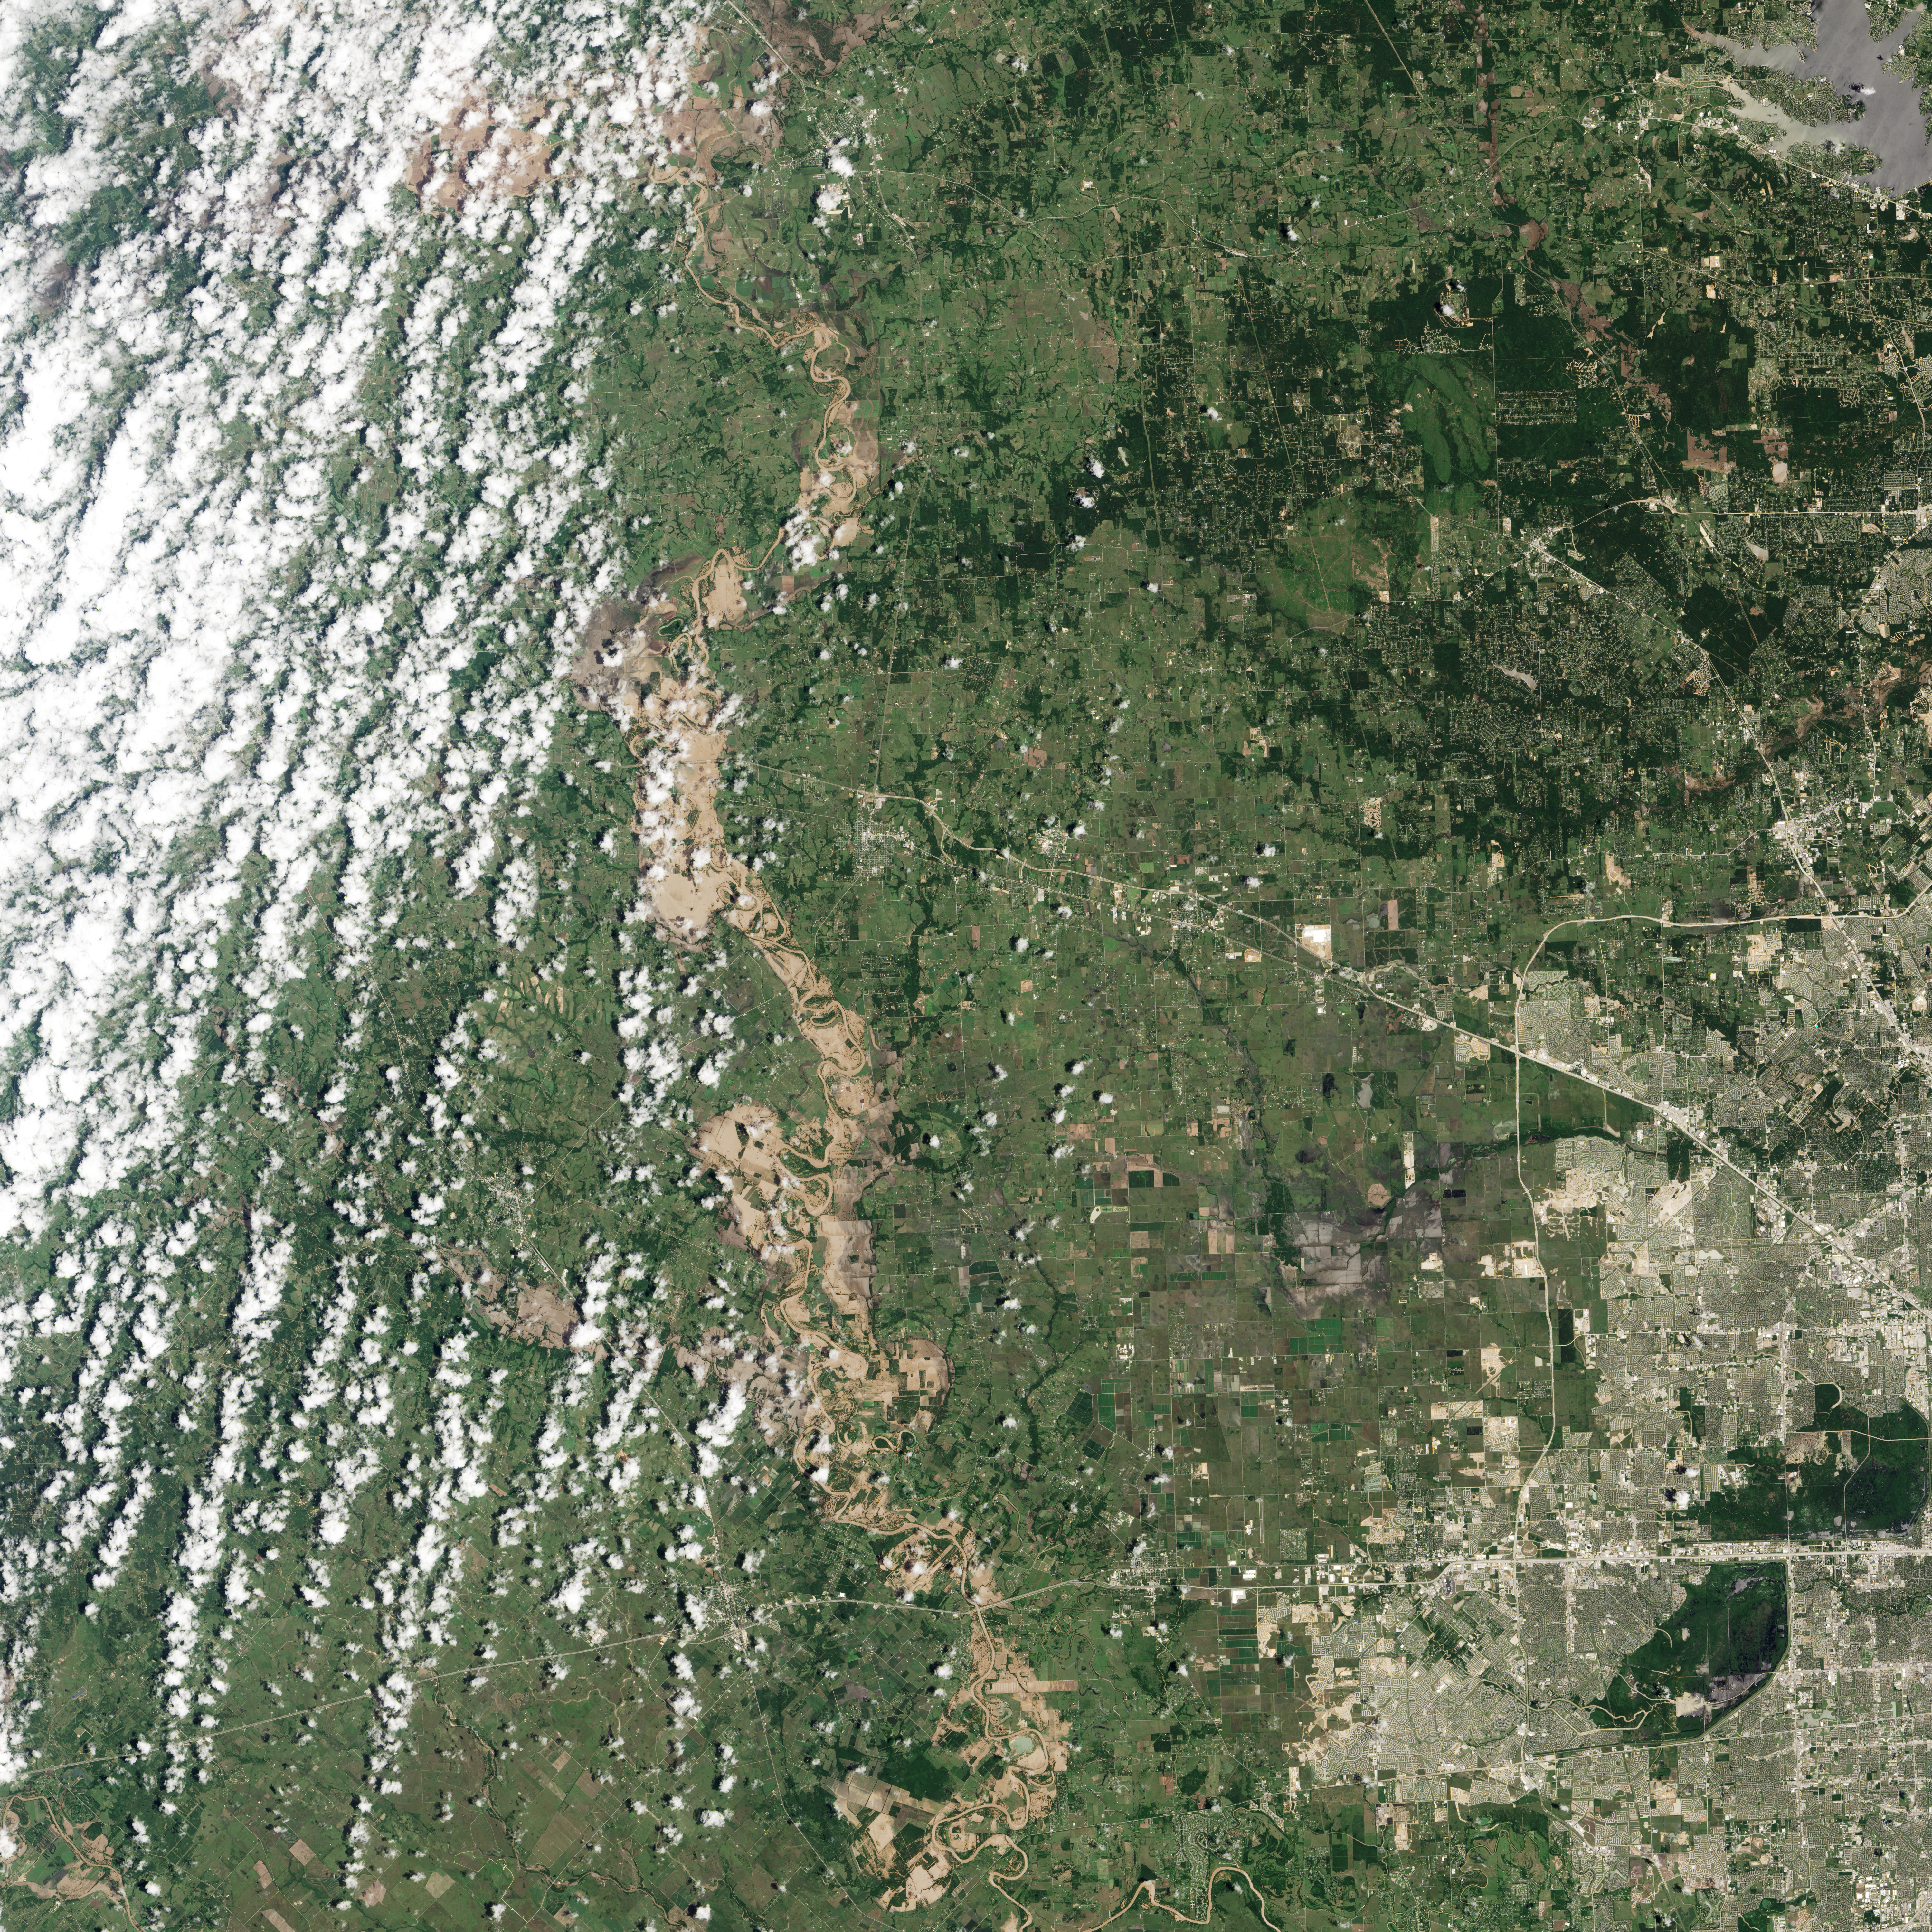 Floodwaters Inundate Southeastern Texas - related image preview